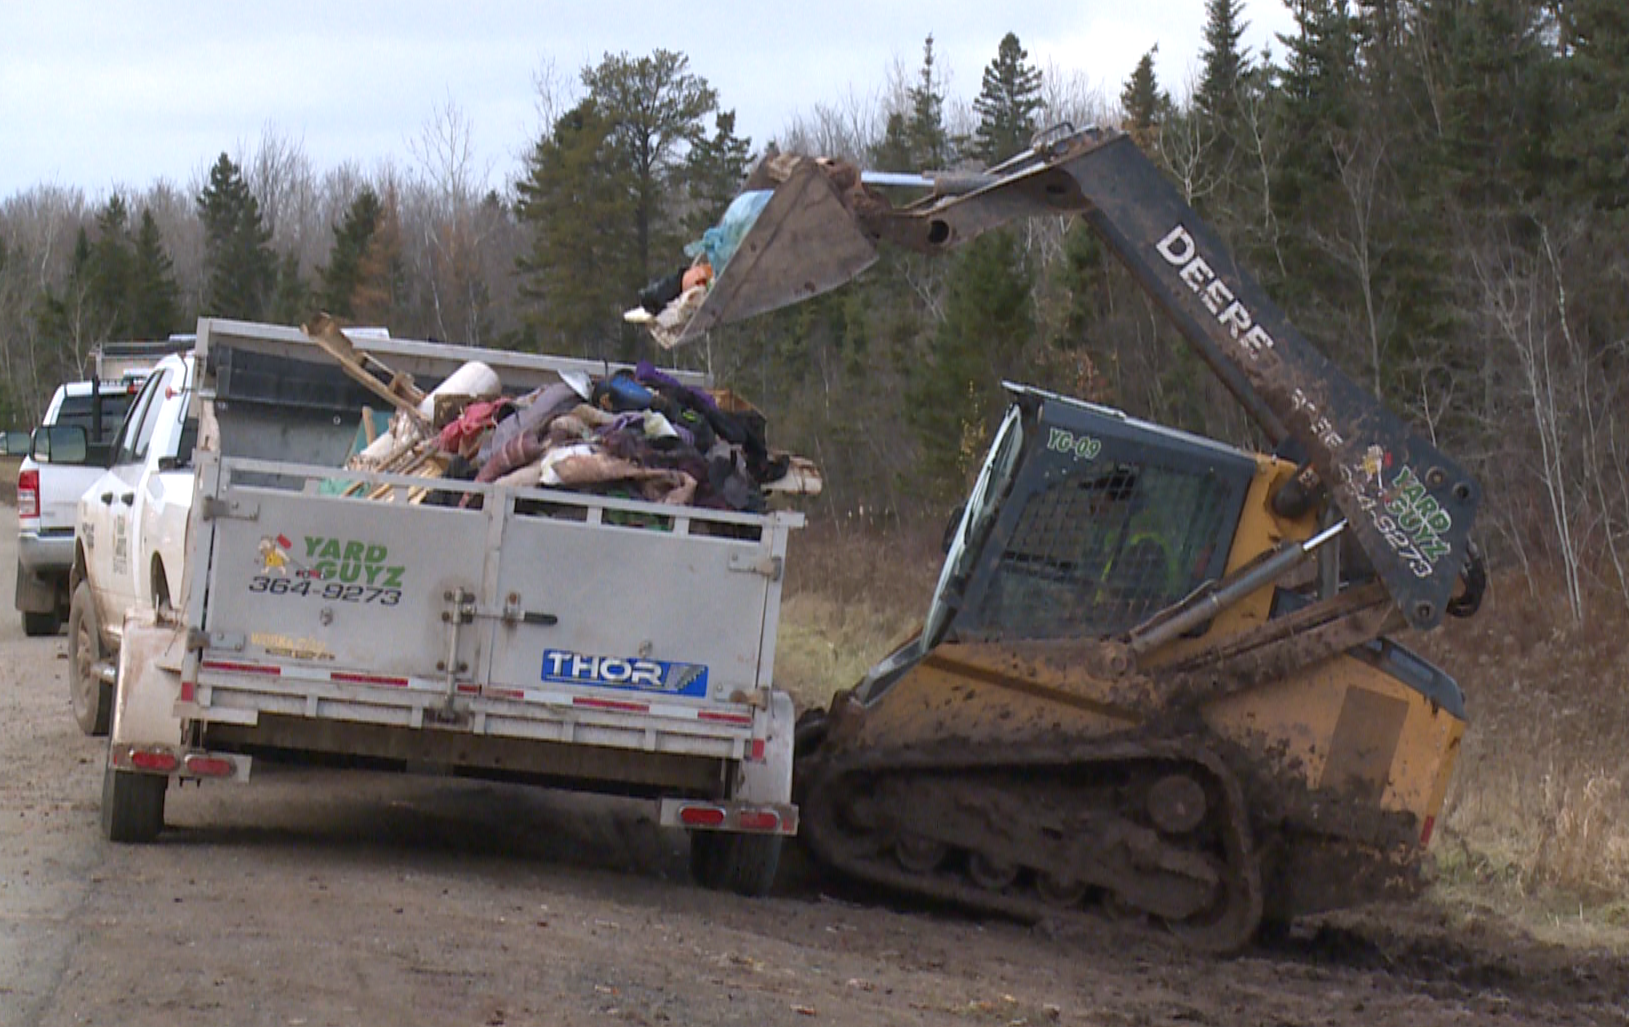 Large Moncton homeless encampment being removed from wooded area